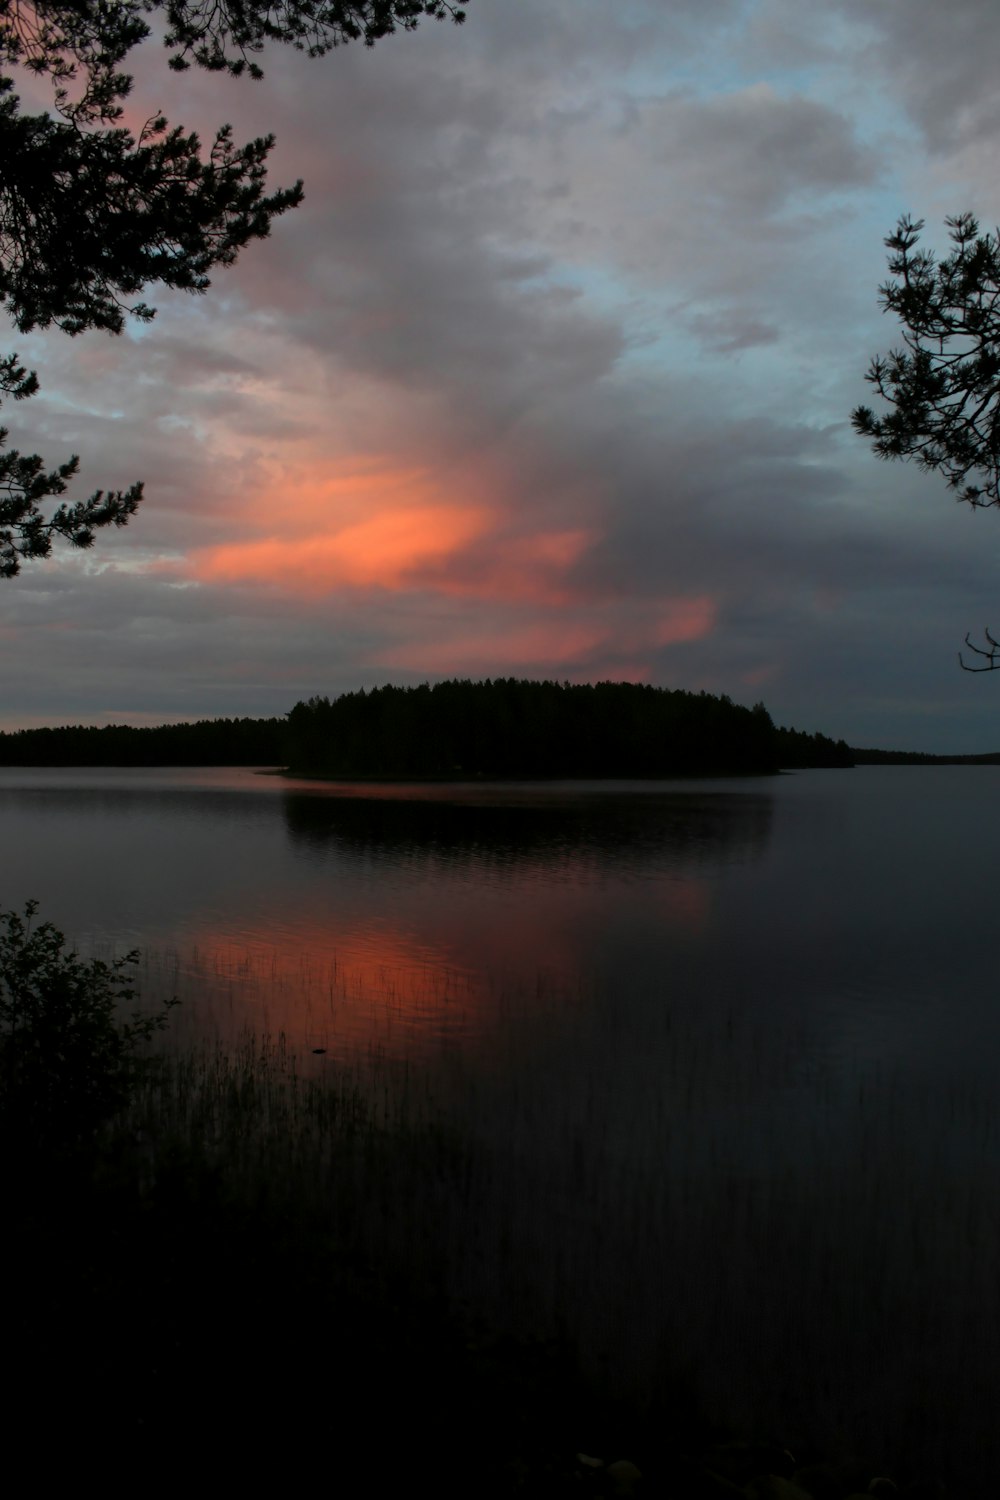 a sunset over a lake with a small island in the distance